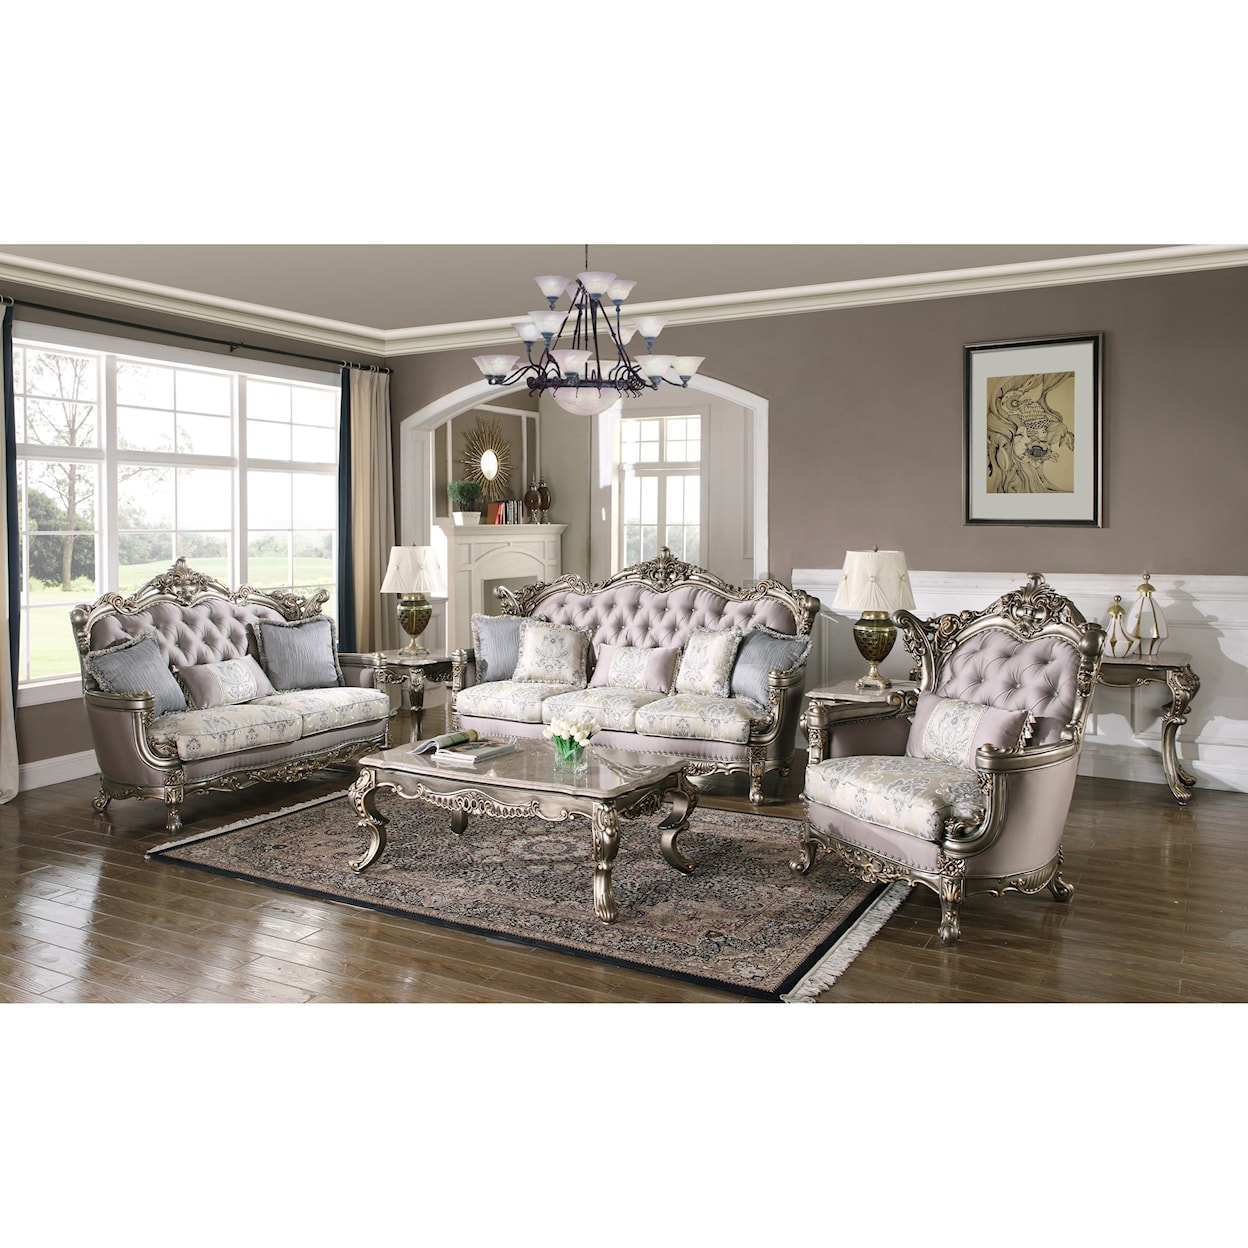 New Classic Furniture Ophelia Living Room Group